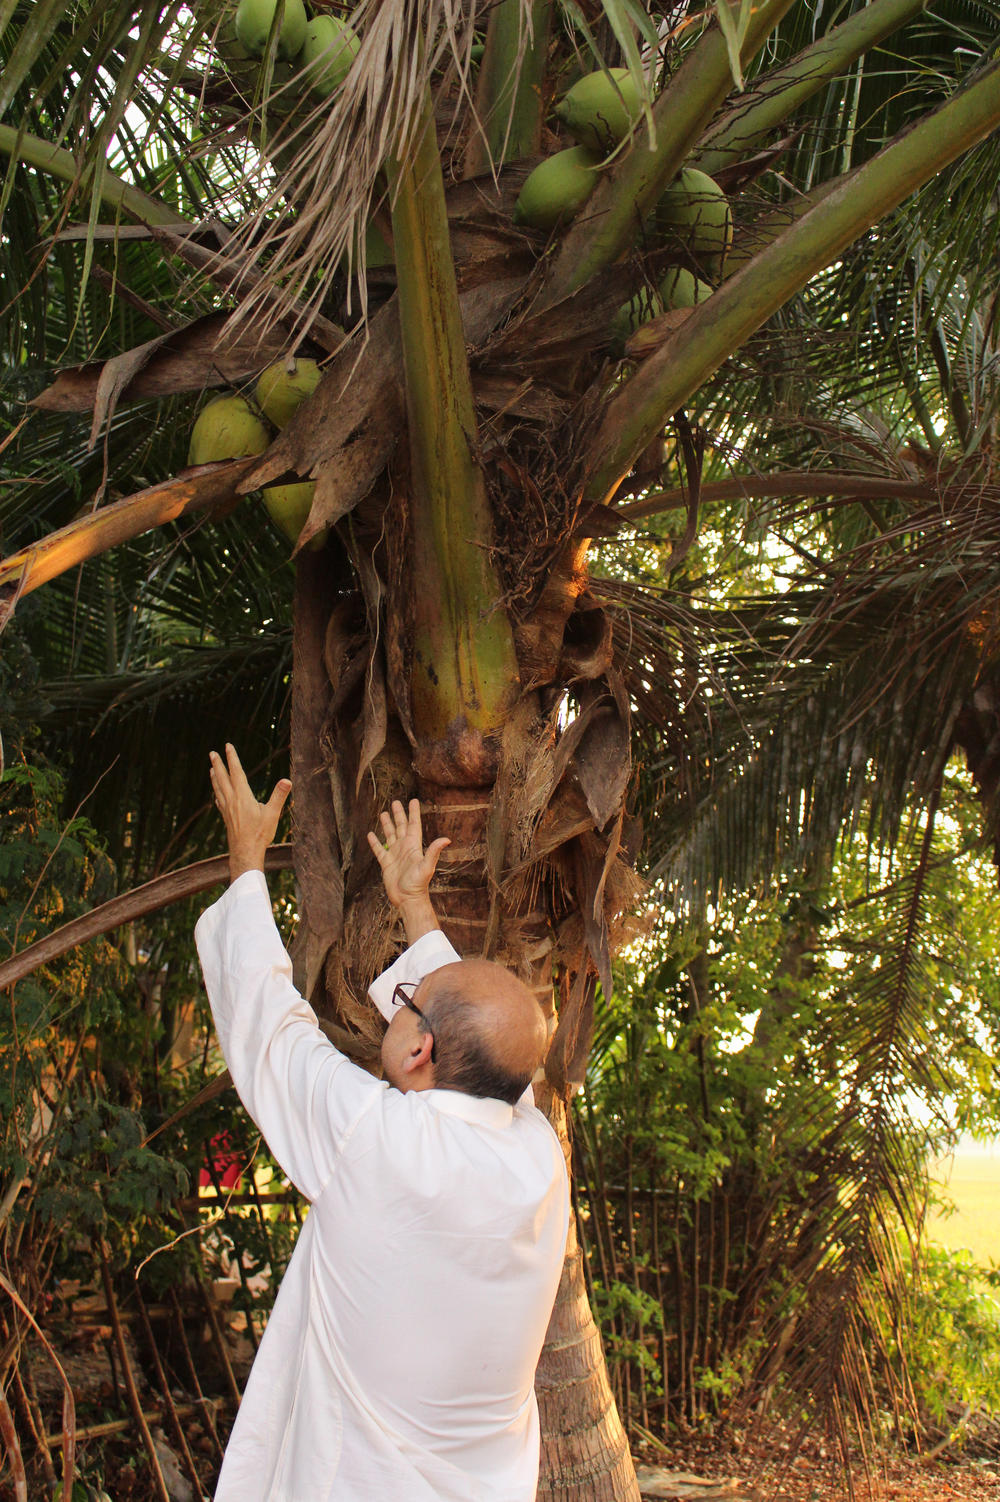 Maansi's father reaches for coconuts hanging over a riverbank in Kerala, India, in April 2017.